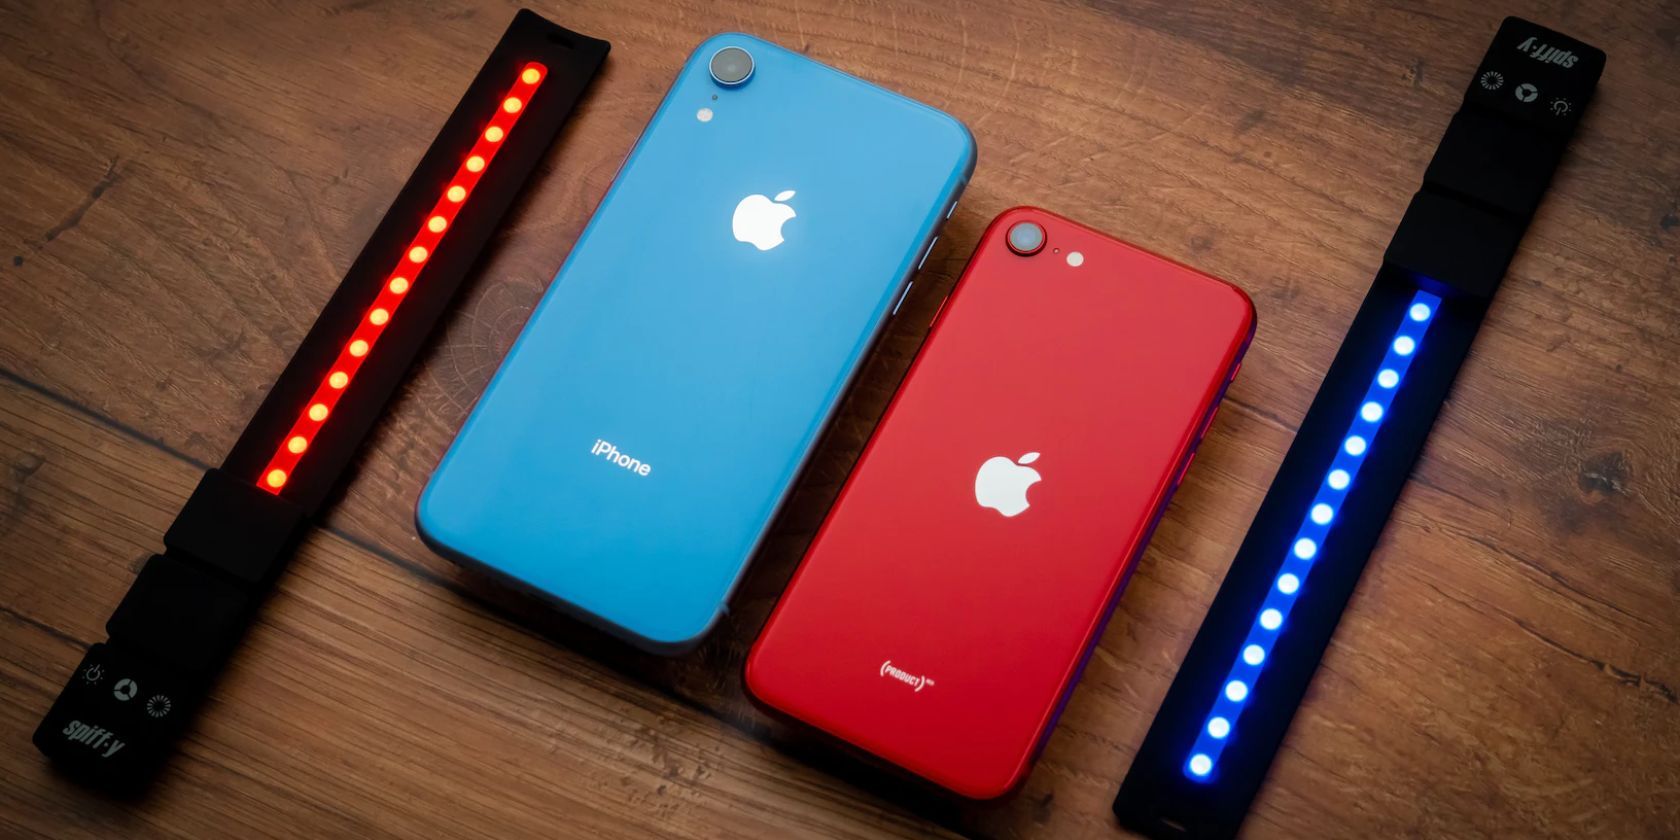 Blue iPhone XR and (PRODUCT)RED iPhone SE side by side